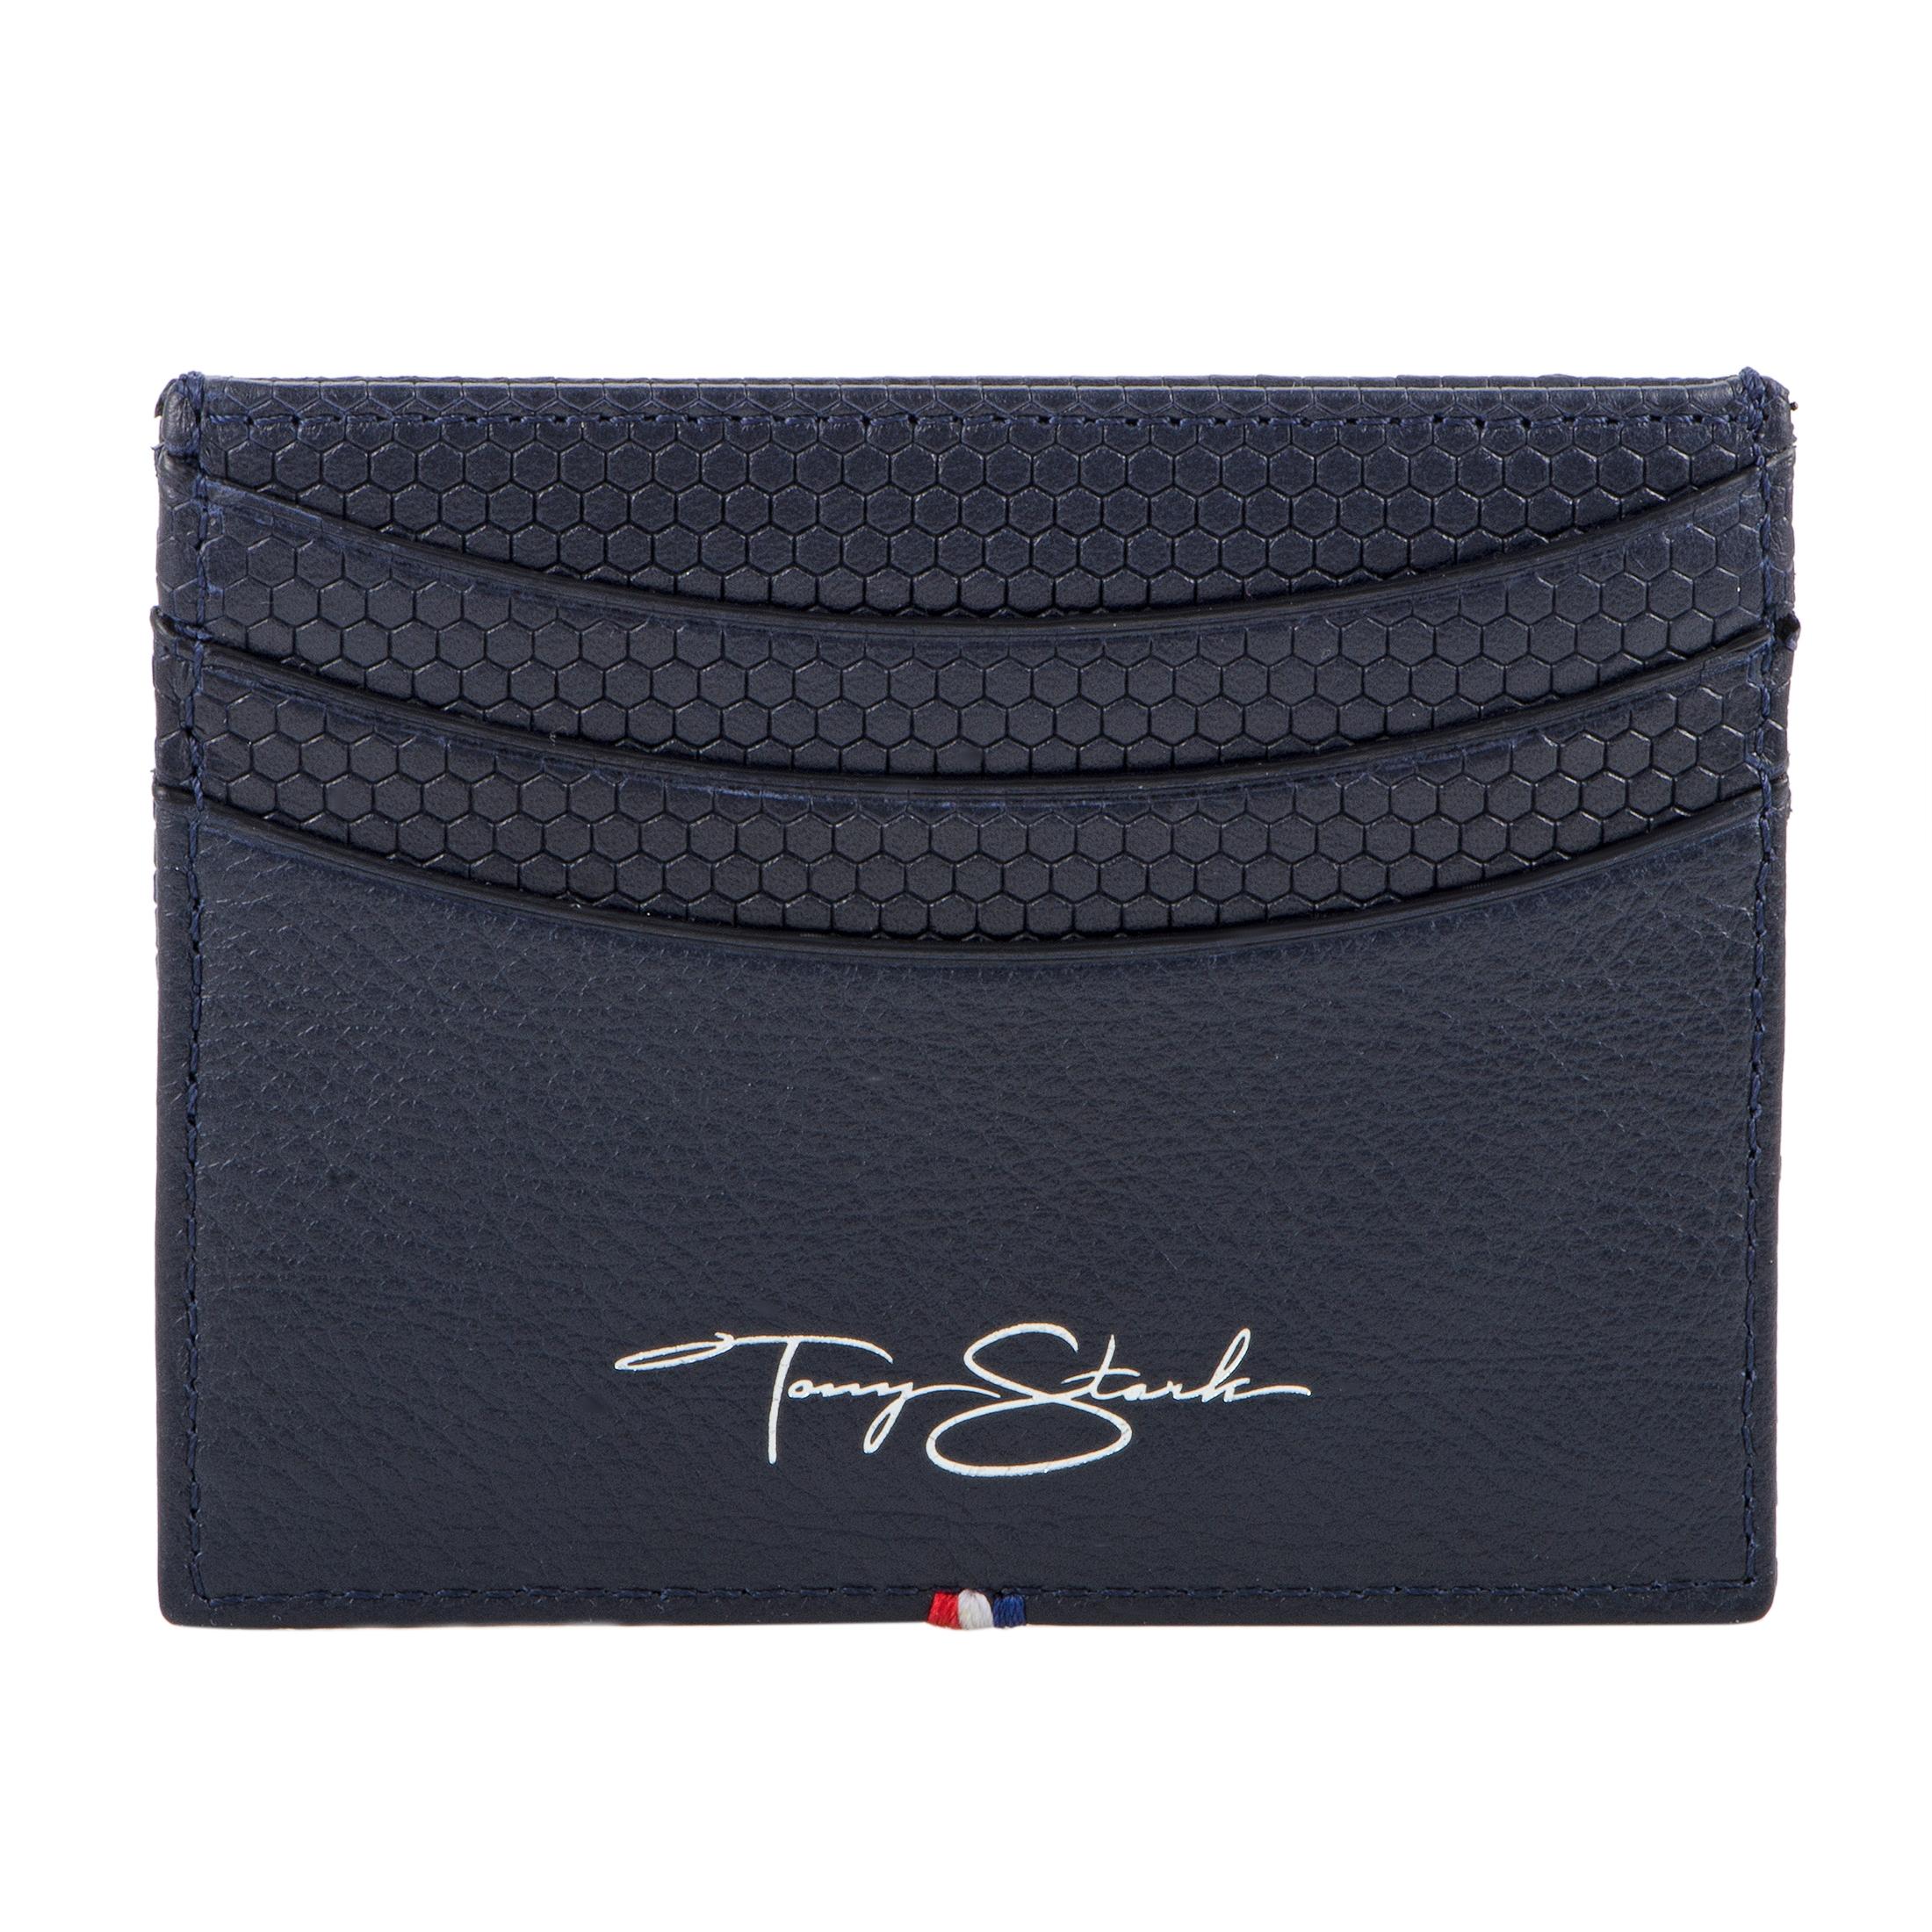 An exquisite item from the renowned French manufacturer, this stylish S.T. Dupont cardholder is masterfully crafted from durable calfskin leather and decorated with an exceptionally elegant honeycomb motif that has been specially created for this